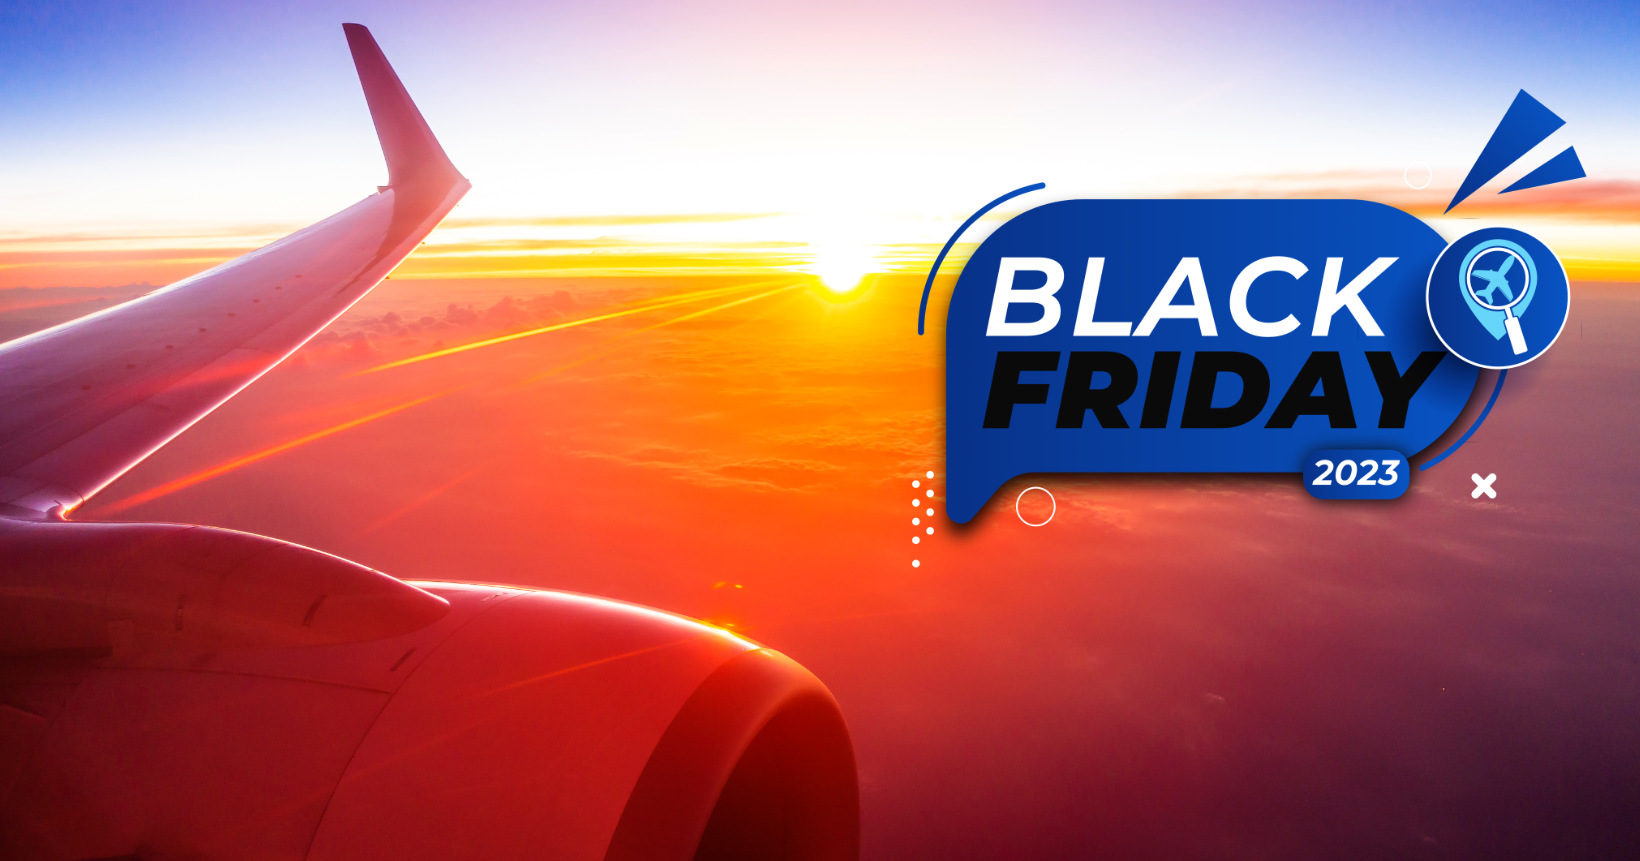 Deserves all the effort!  Black Friday in Latin America has national airline tickets starting at R$171 round-trip